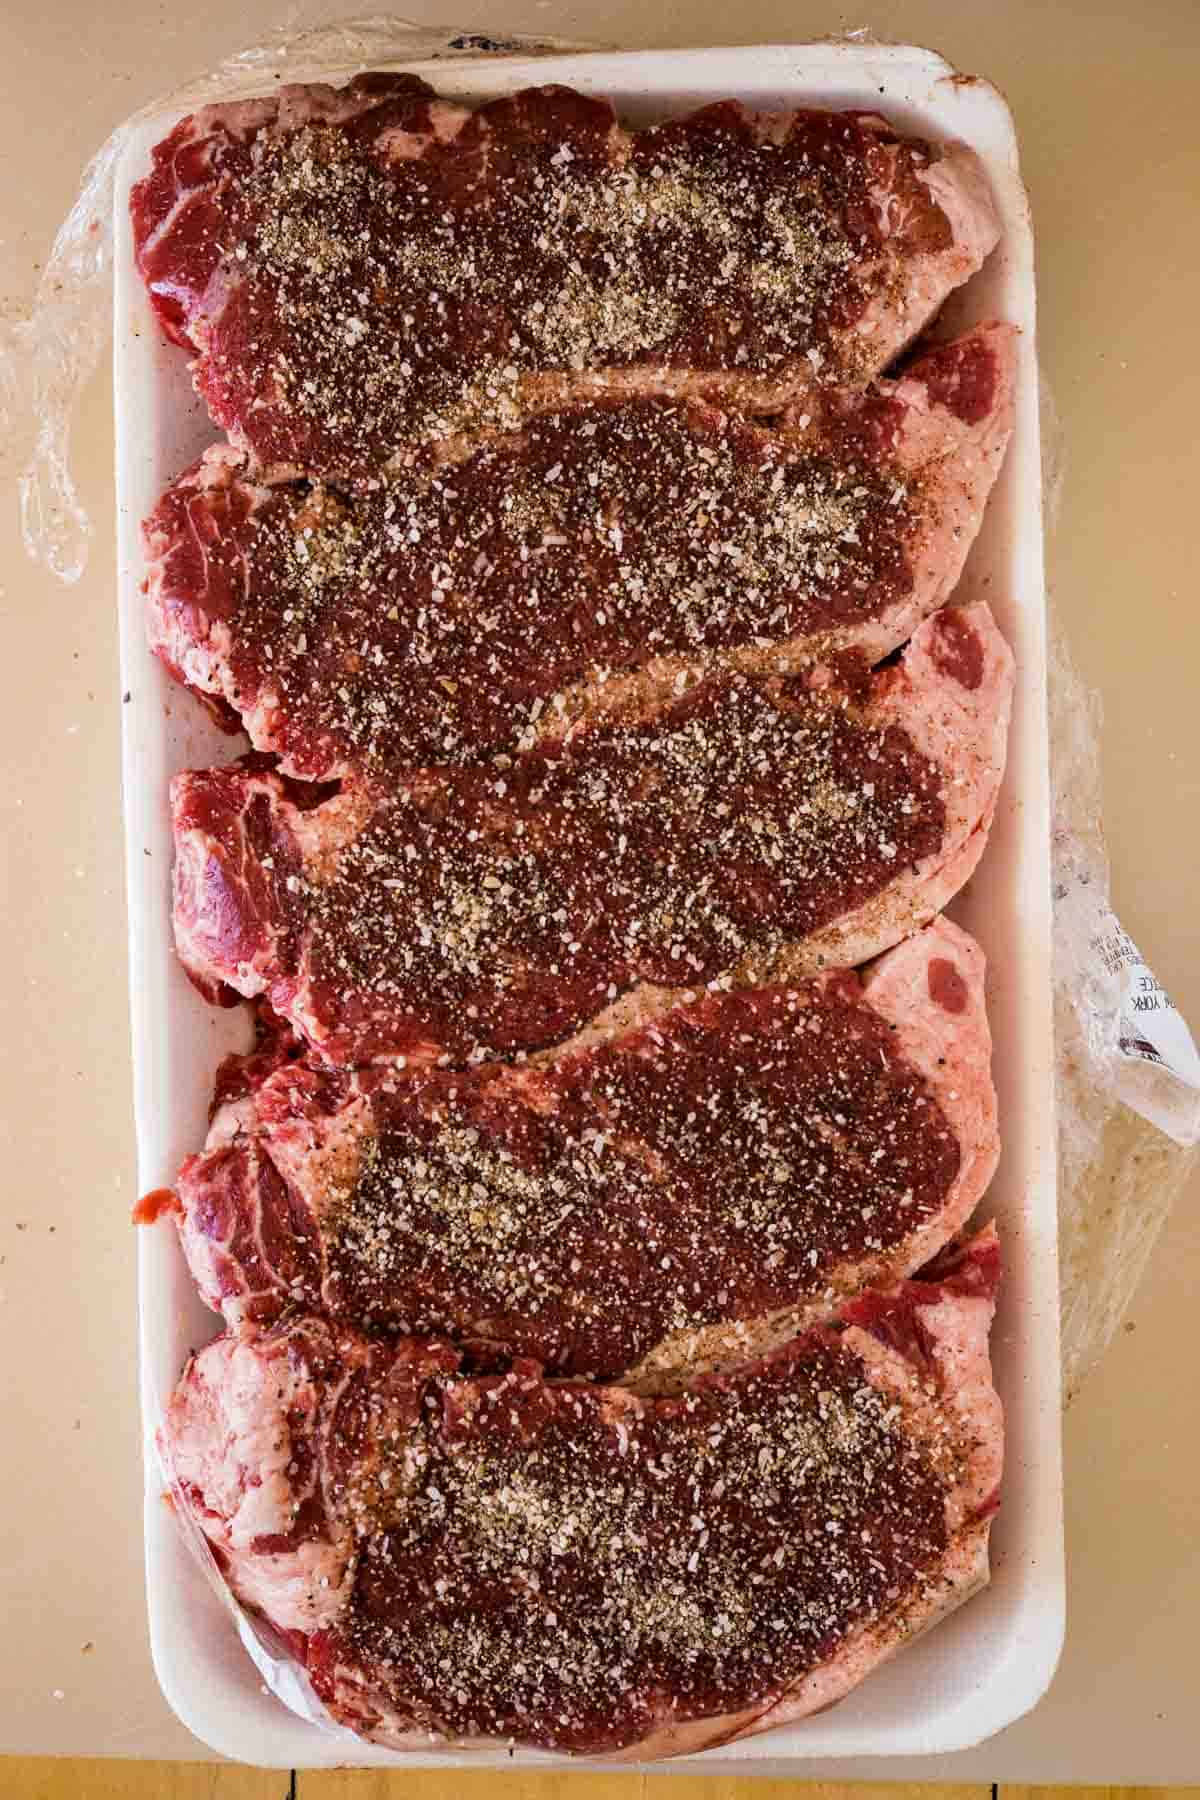 Raw ny strip steaks with salt and pepper.